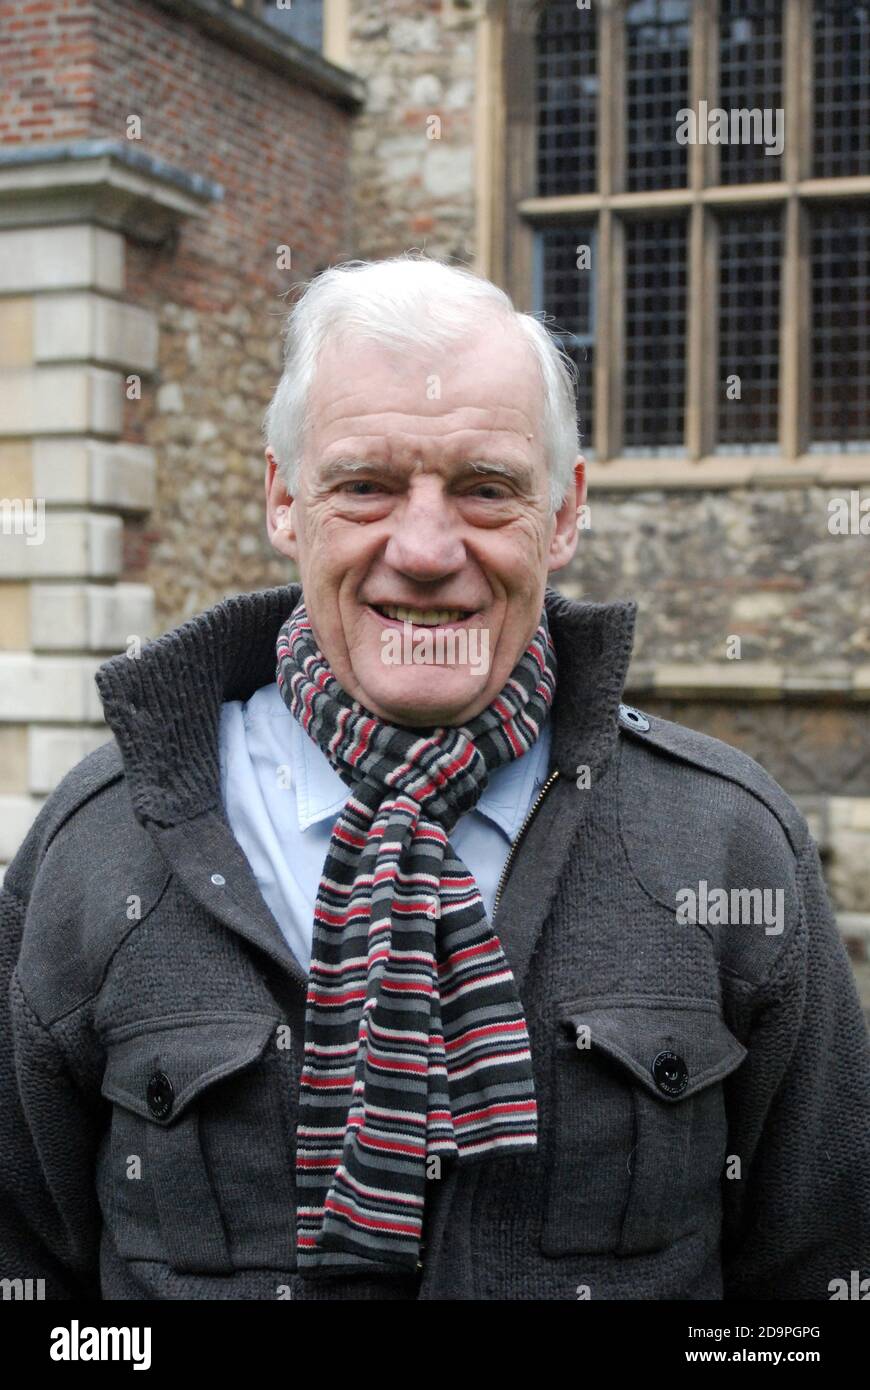 Richard Kimber Franklin, AKA Richard Franklin, English theatre, TV, film actor, writer, director and political activist. Known for Dr Who, Doctor Who. Stock Photo